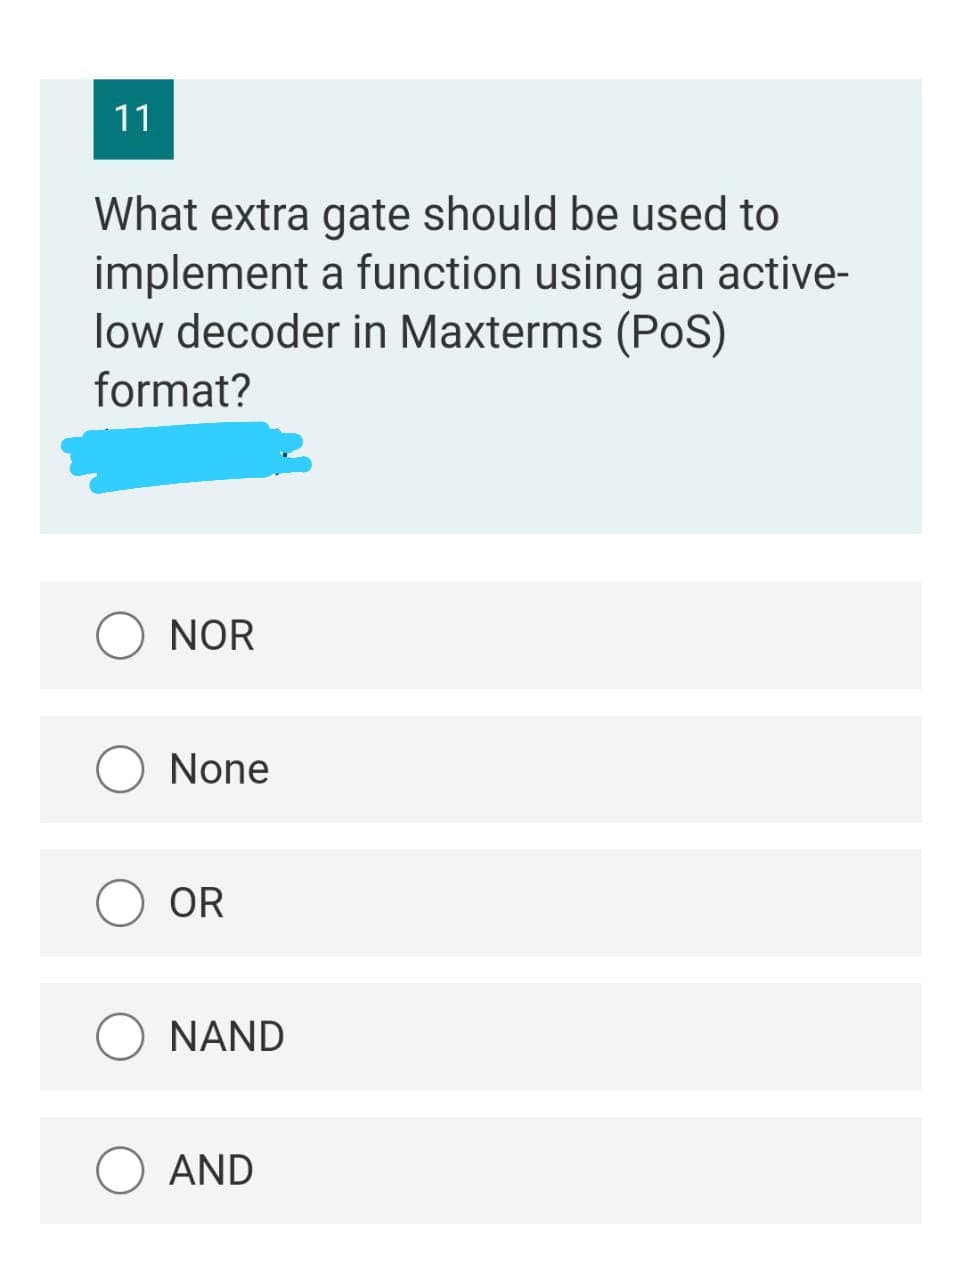 11
What extra gate should be used to
implement a function using an active-
low decoder in Maxterms (PoS)
format?
NOR
None
OR
NAND
AND
